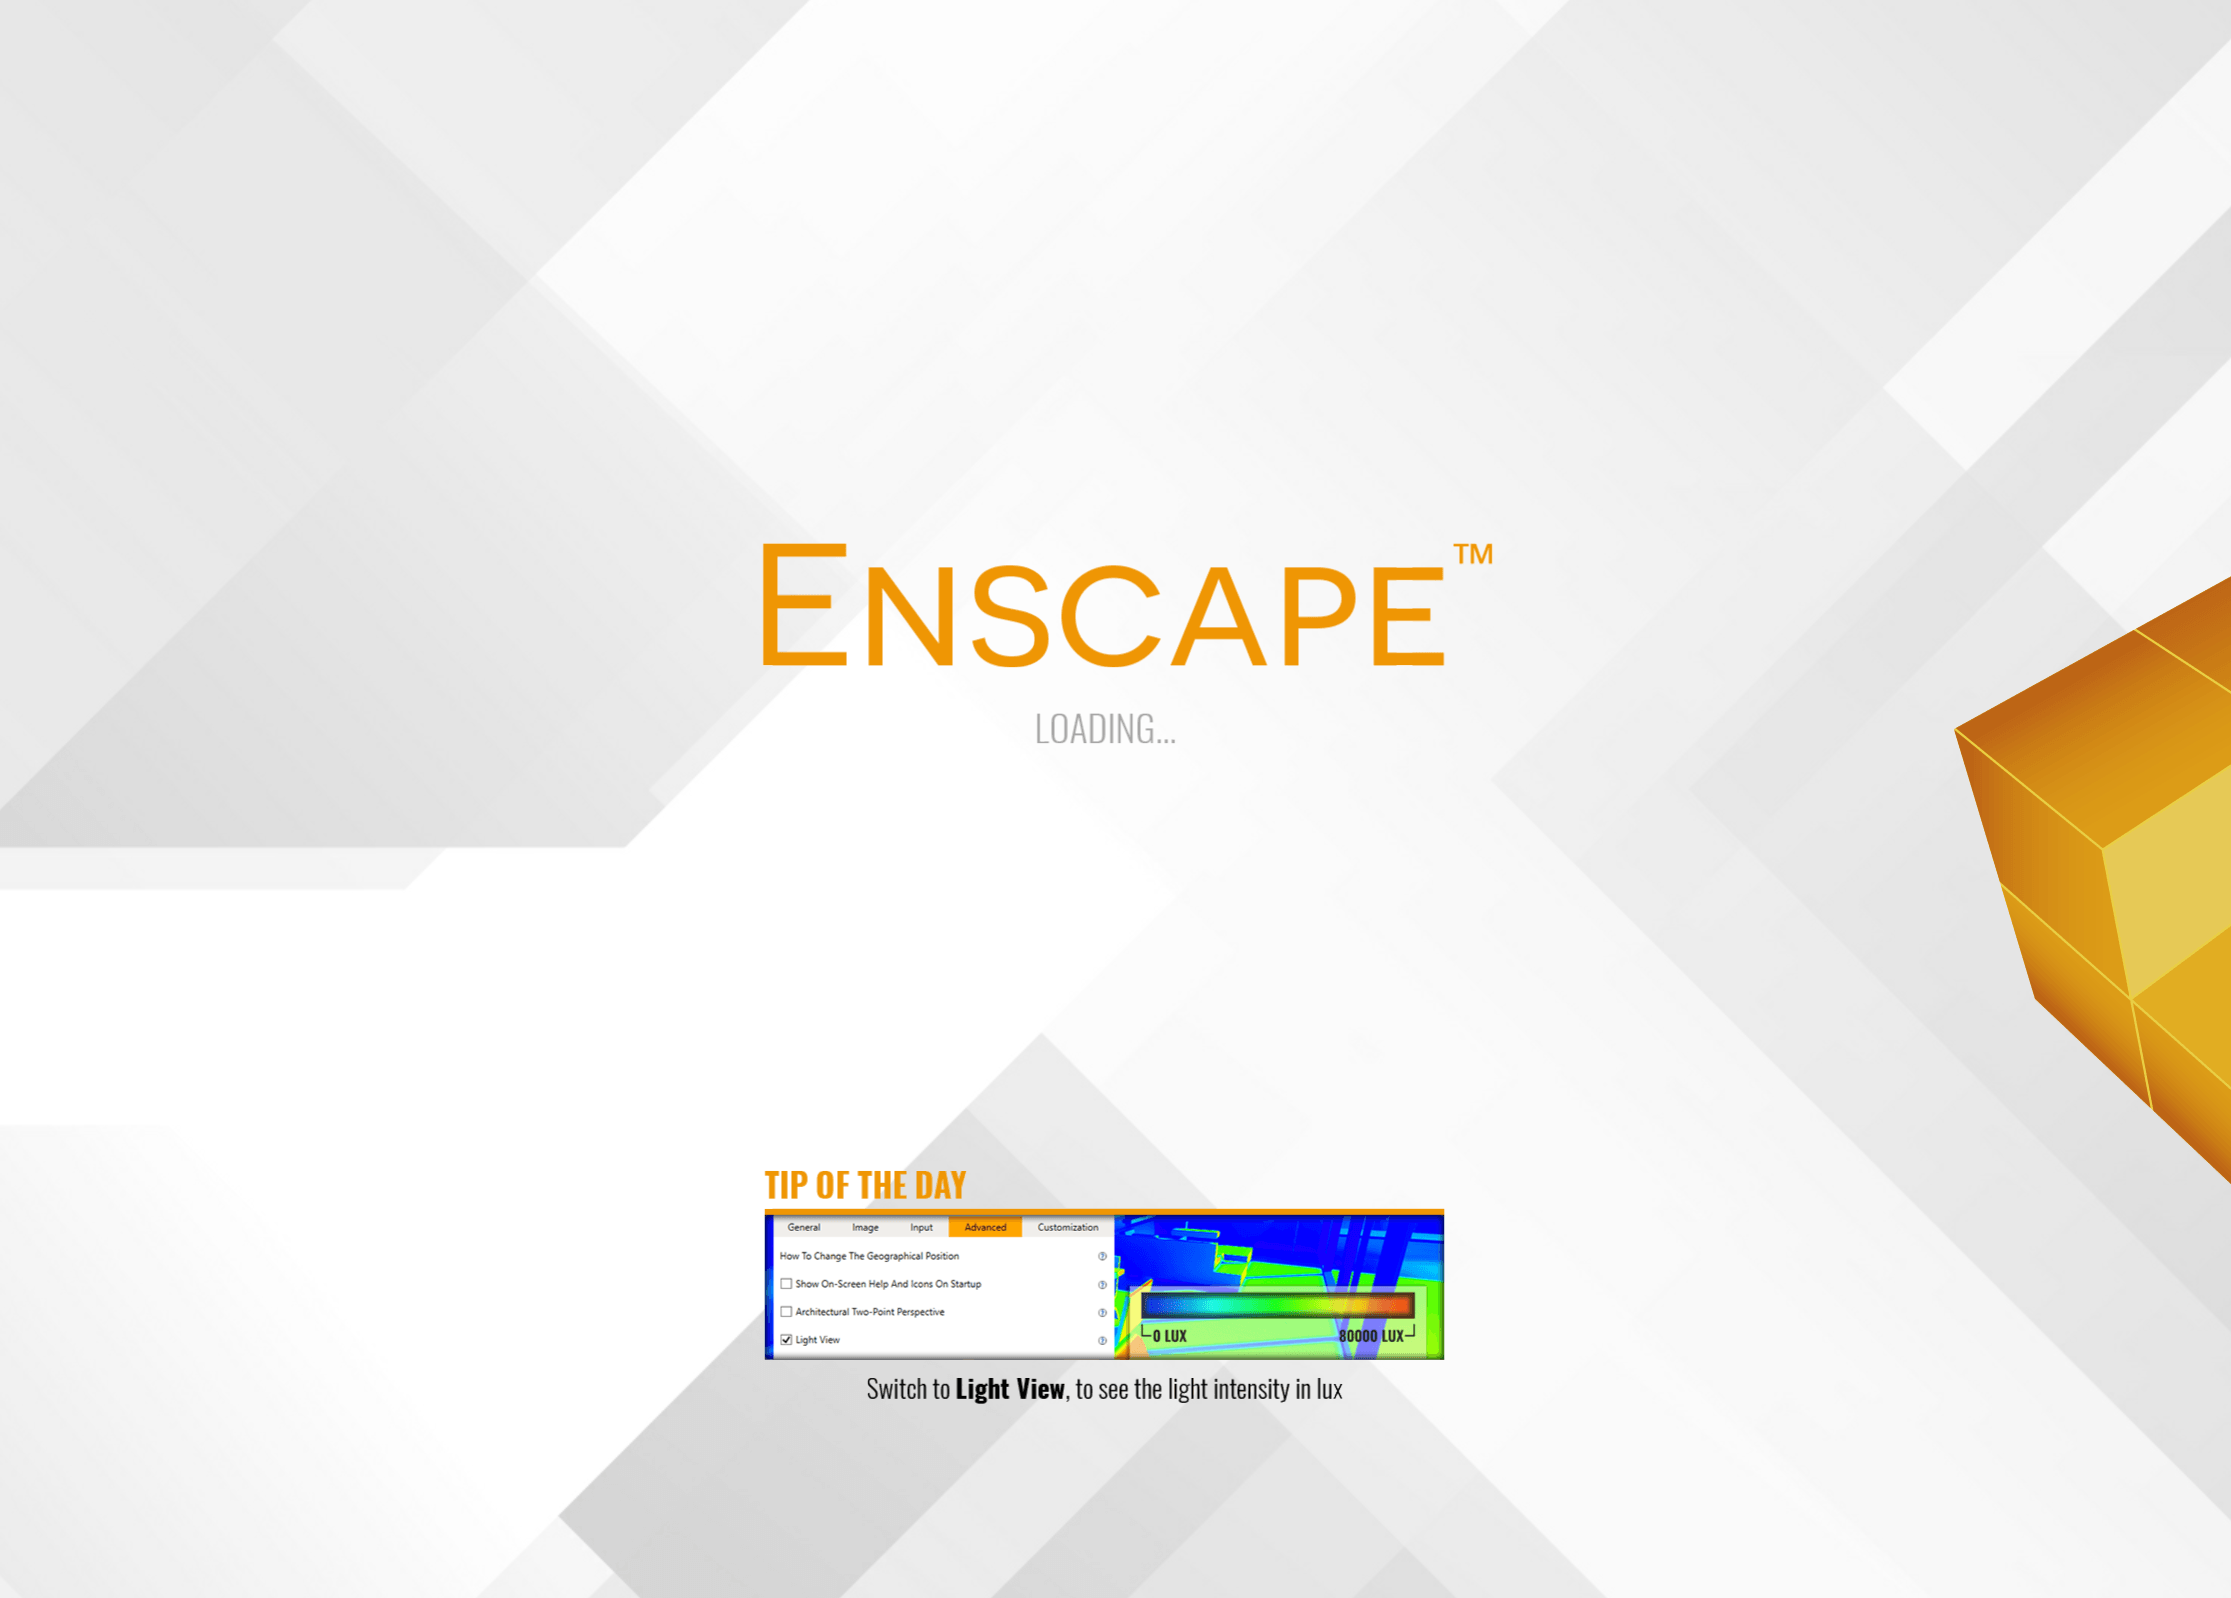 Enscape Logo - Failed to Load Enscape for SketchUp Community Forum